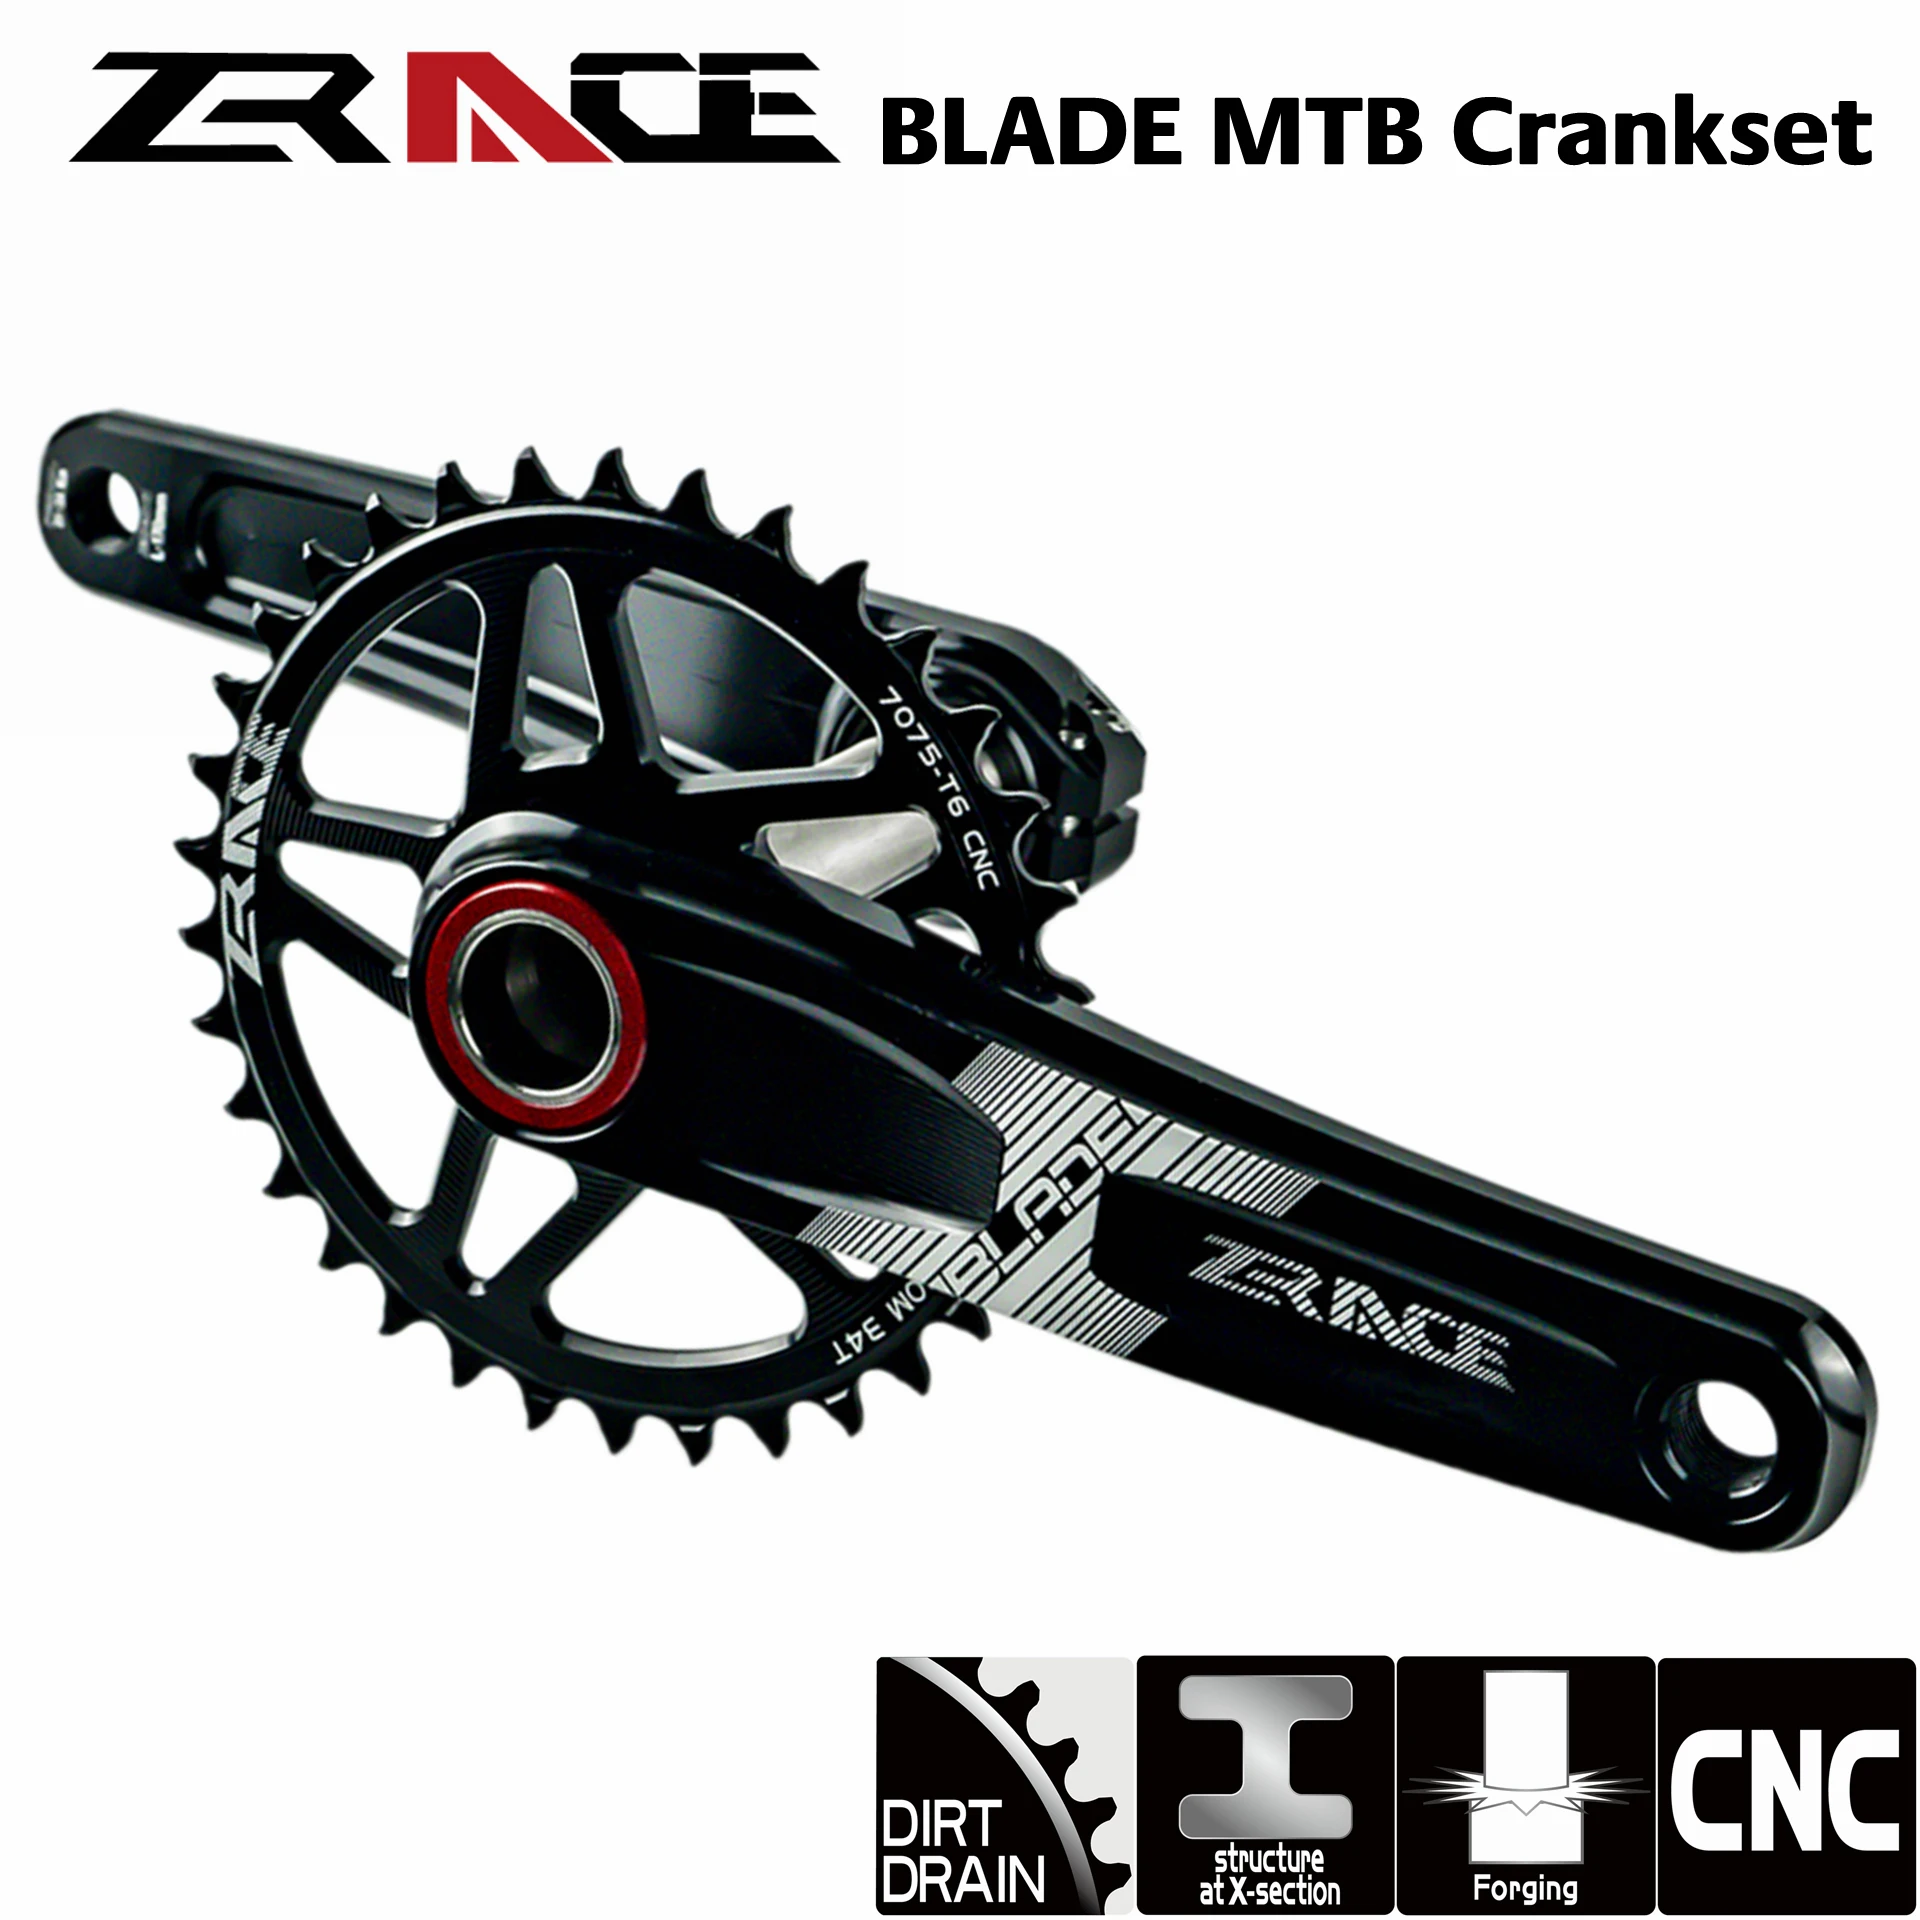 ZRACE BLADE 1 x 10 11 12 Speed Crankset Eagle Tooth for MTB XC/TR/AM 170/175mm, 32T/34T/36T,BB68/73 Chainset for mtb bike